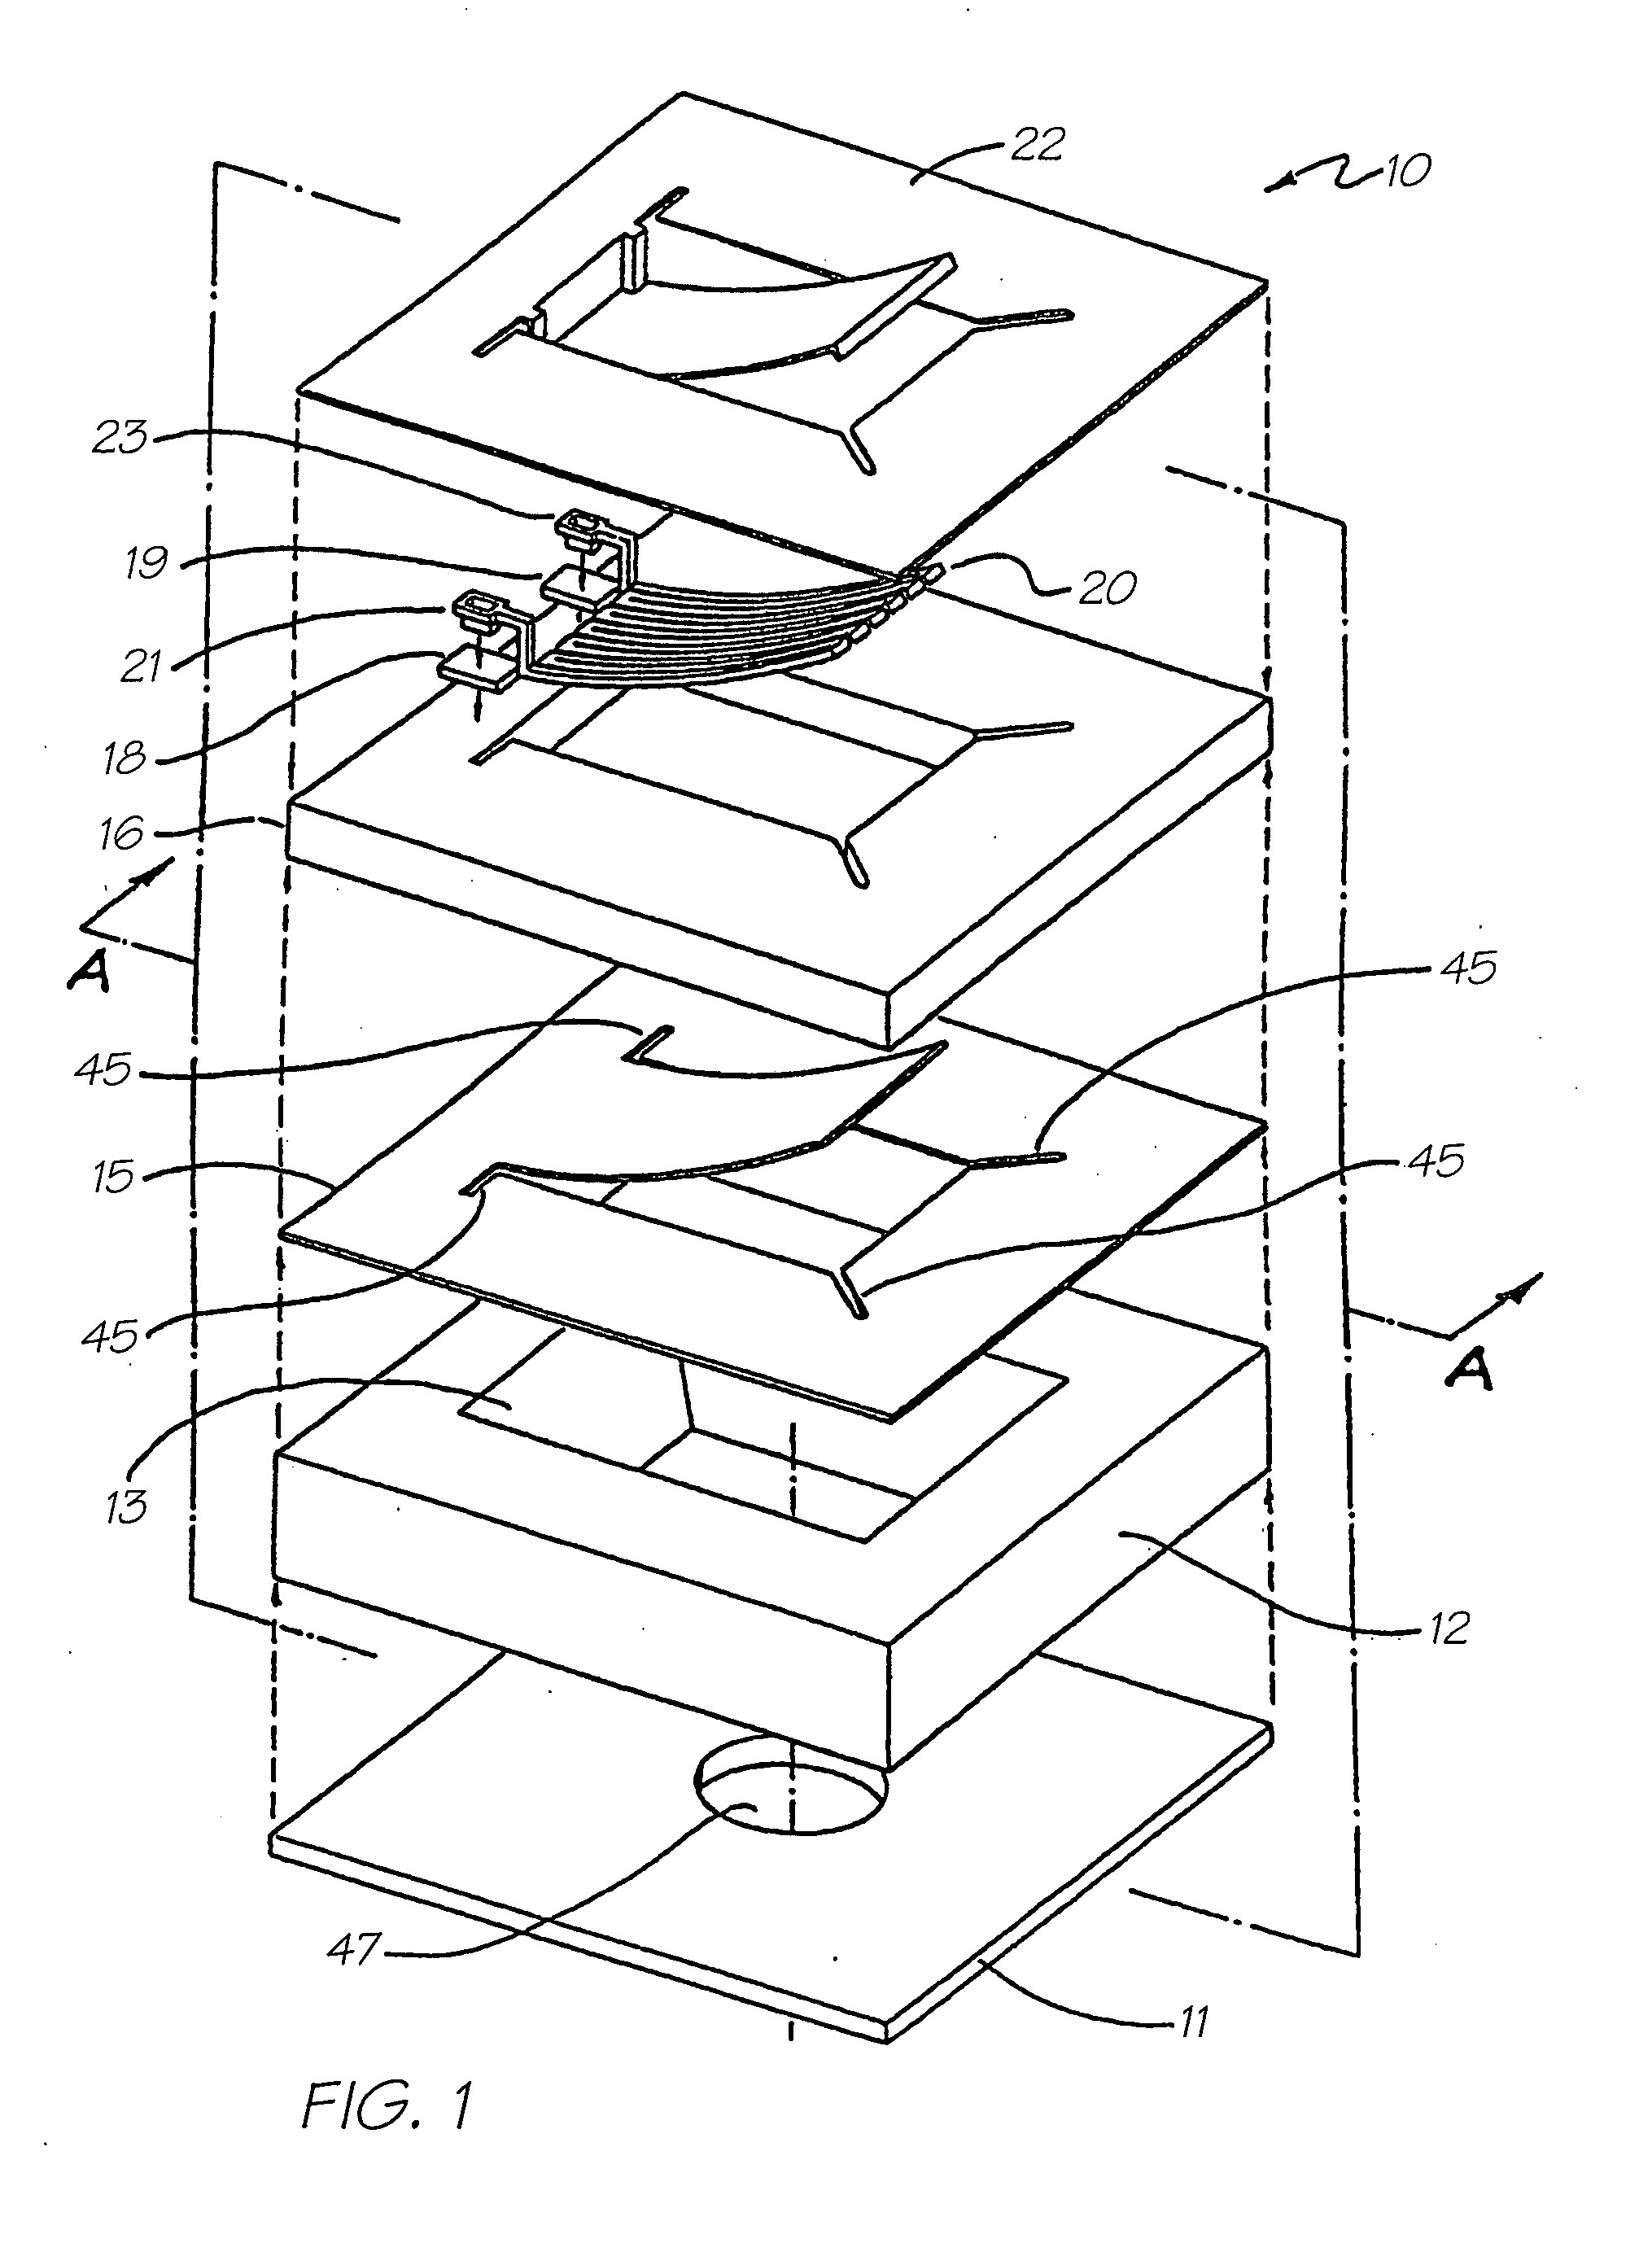 Printhead integrated circuit with high density array of droplet ejectors